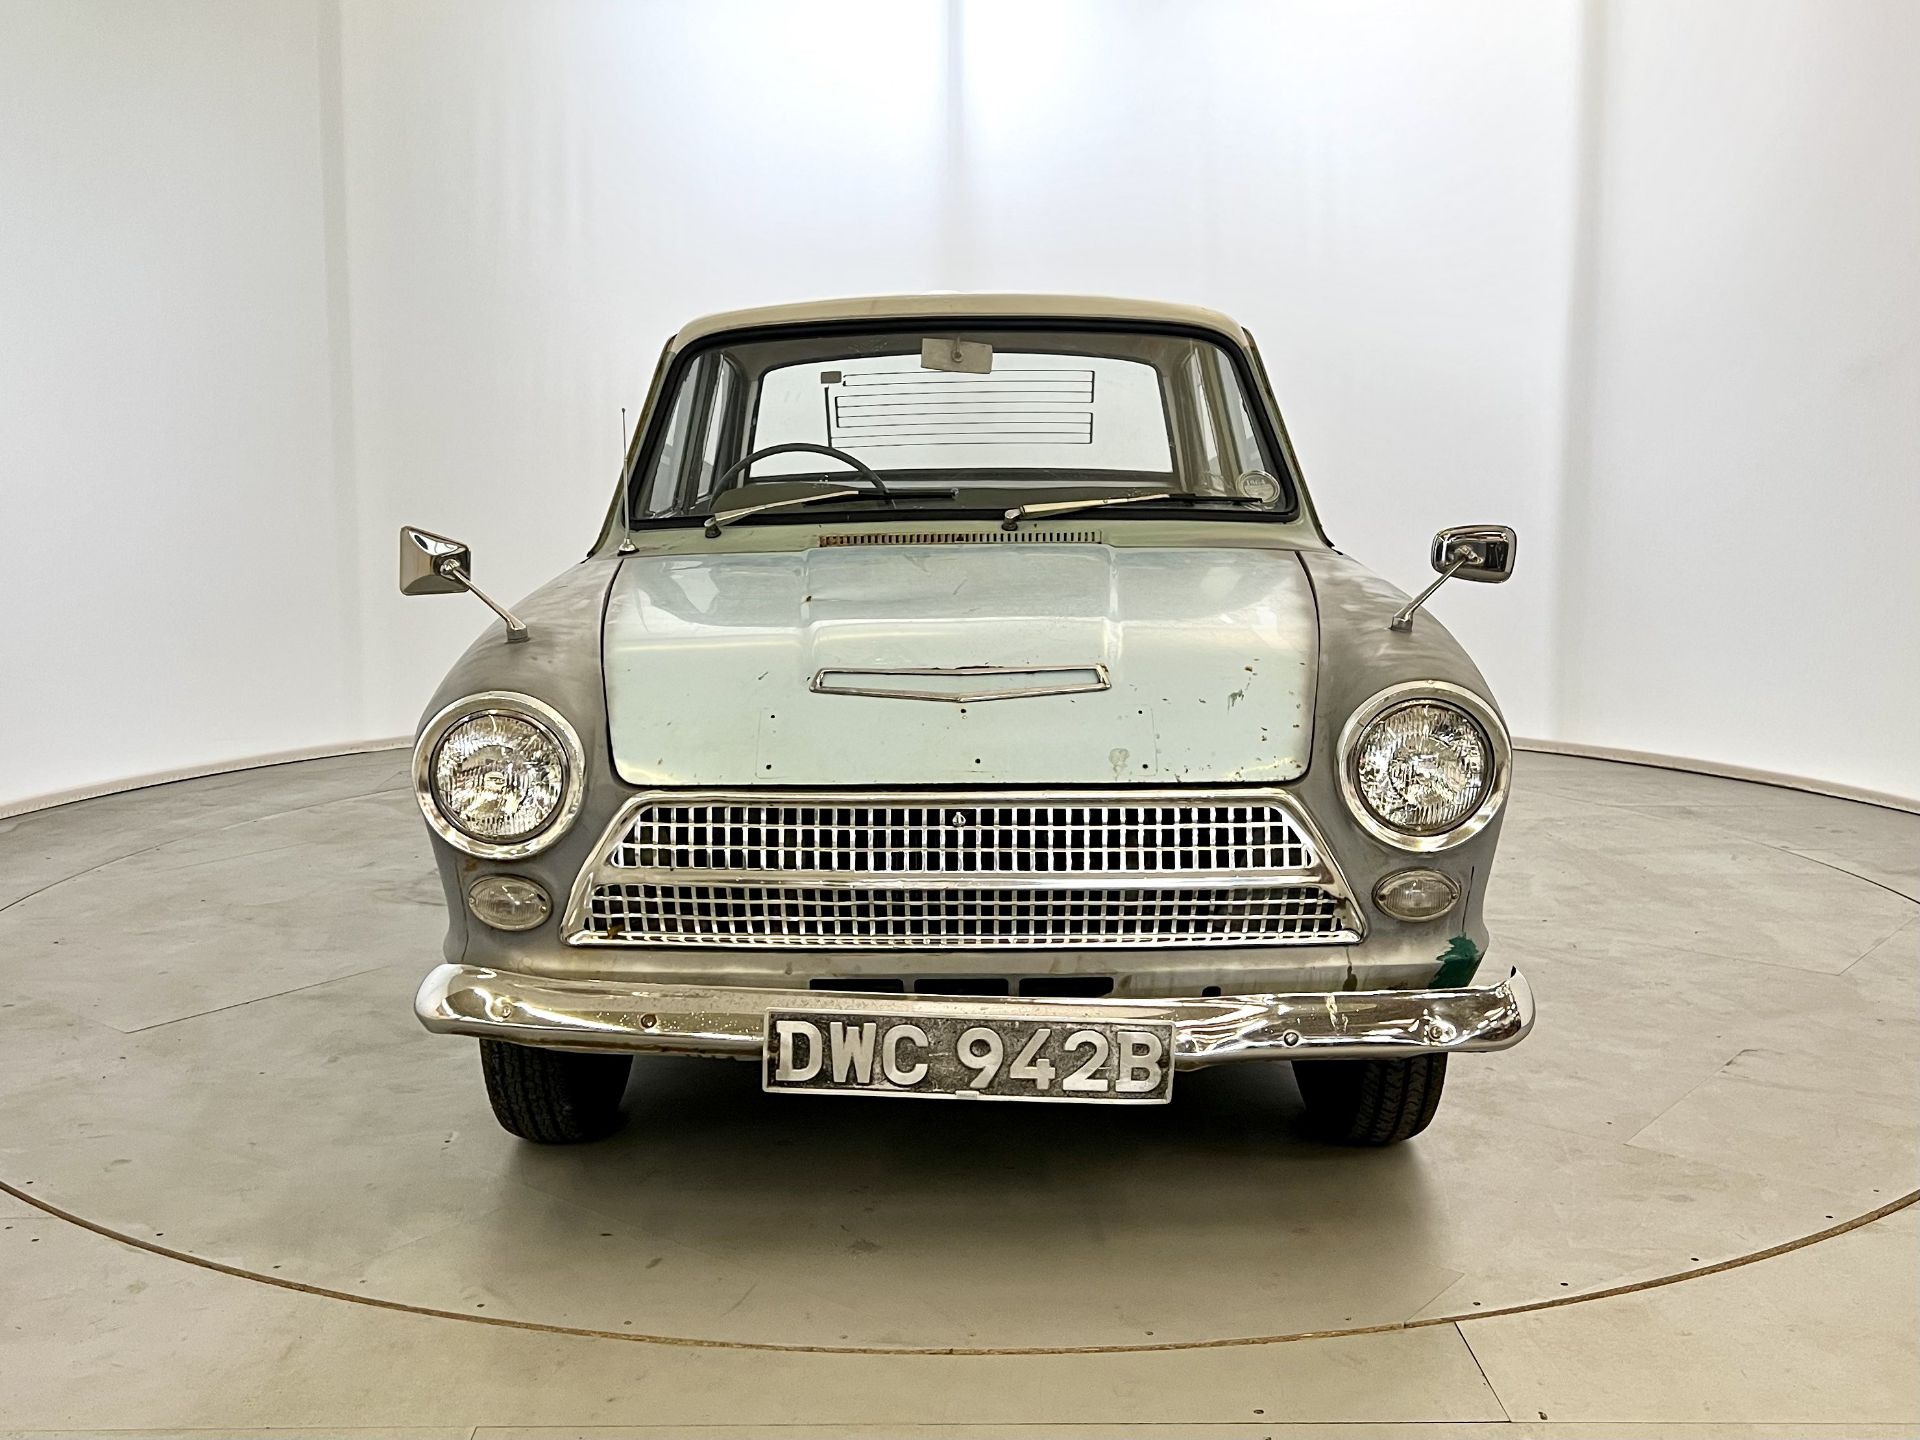 Ford Cortina Deluxe - Image 2 of 31